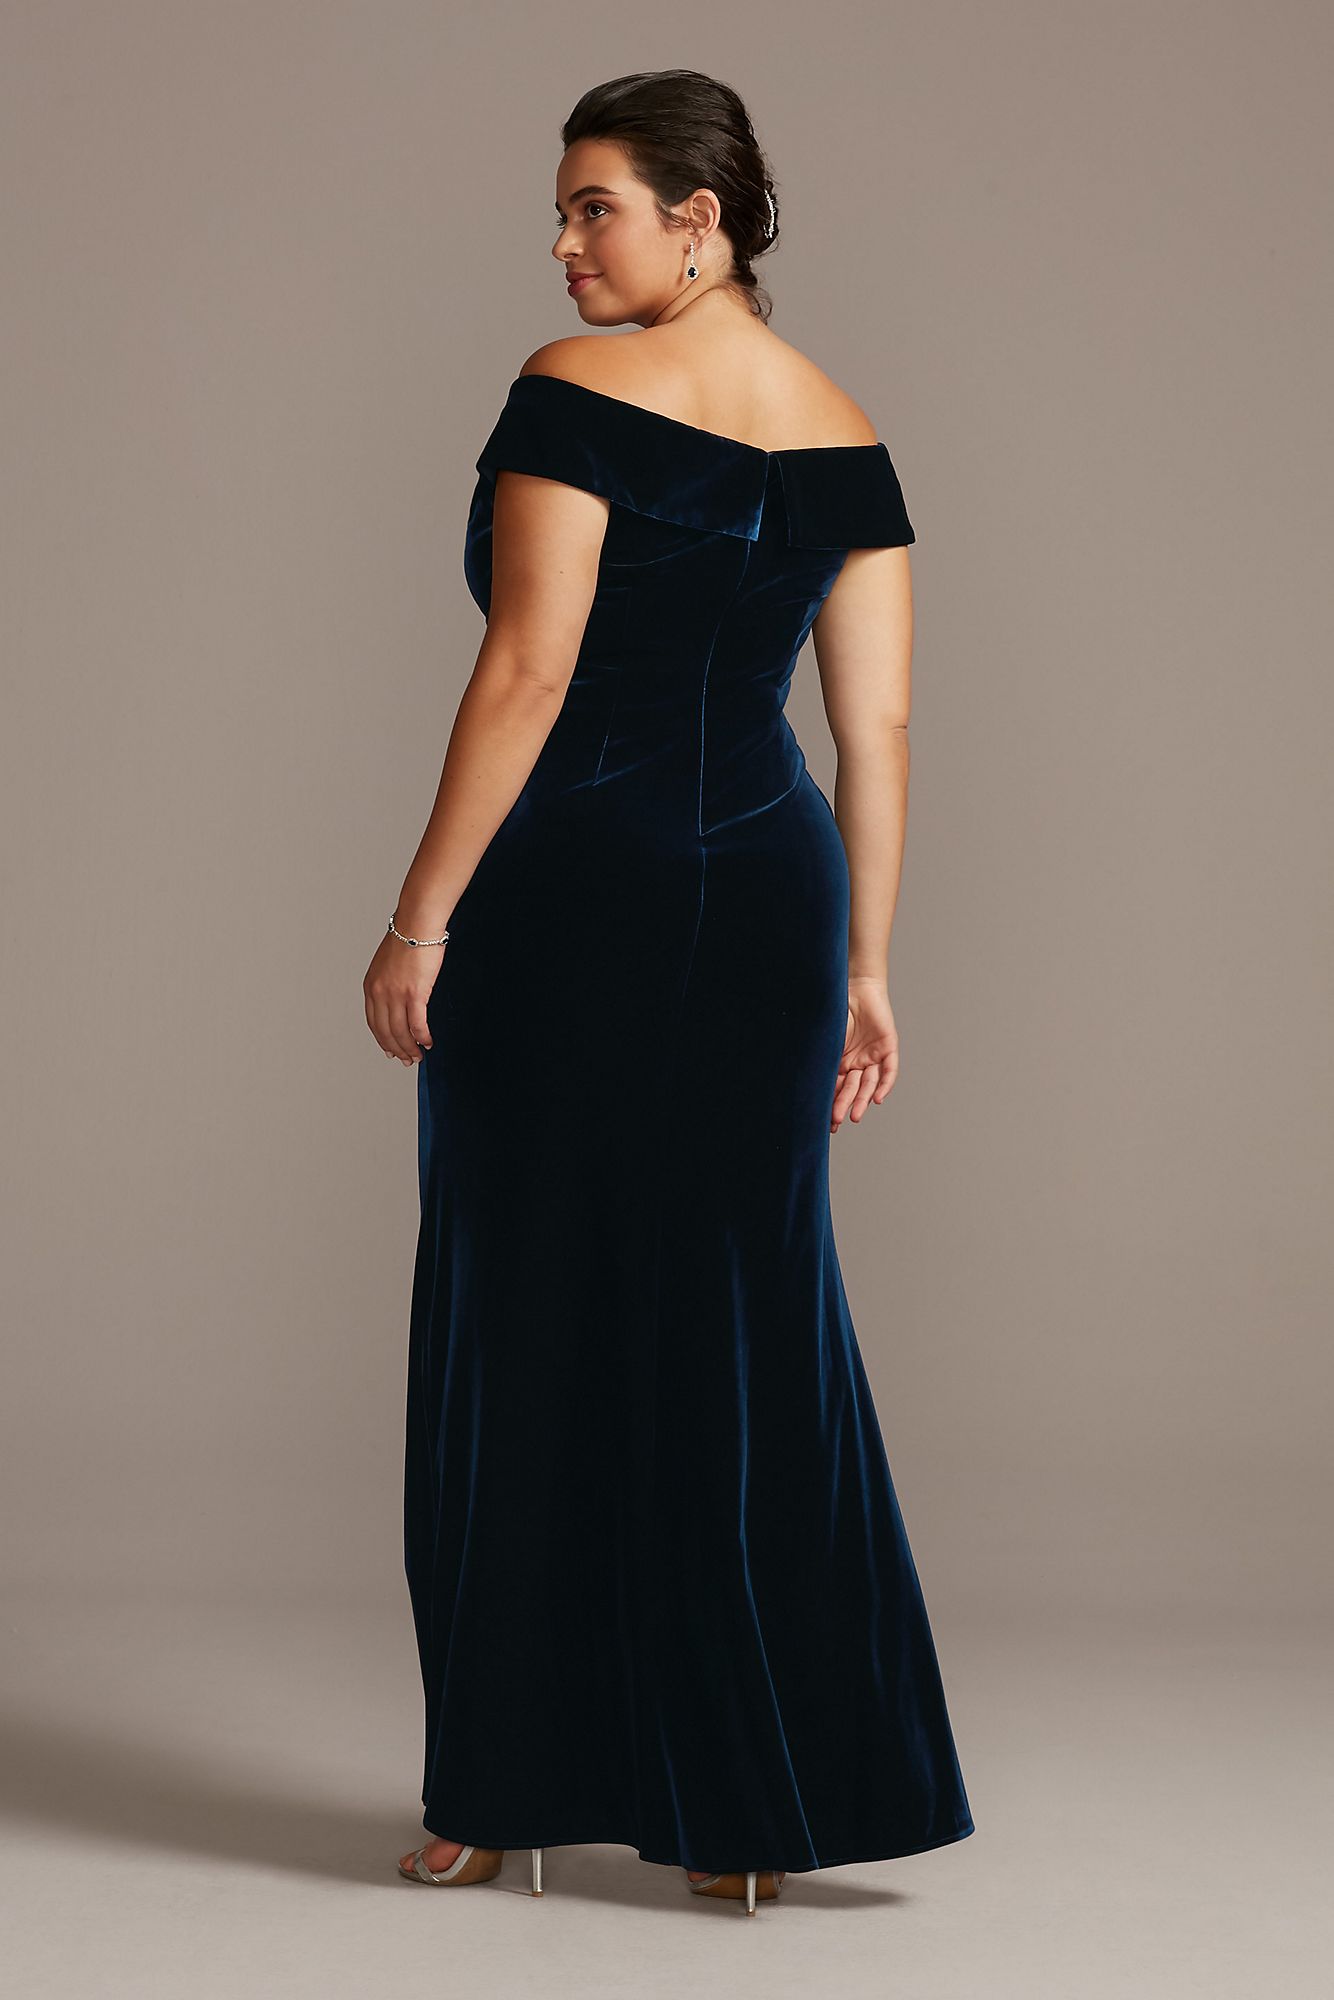 Plus Size Beaded Off-the-Shoulder Velvet 84917701 Style Gown